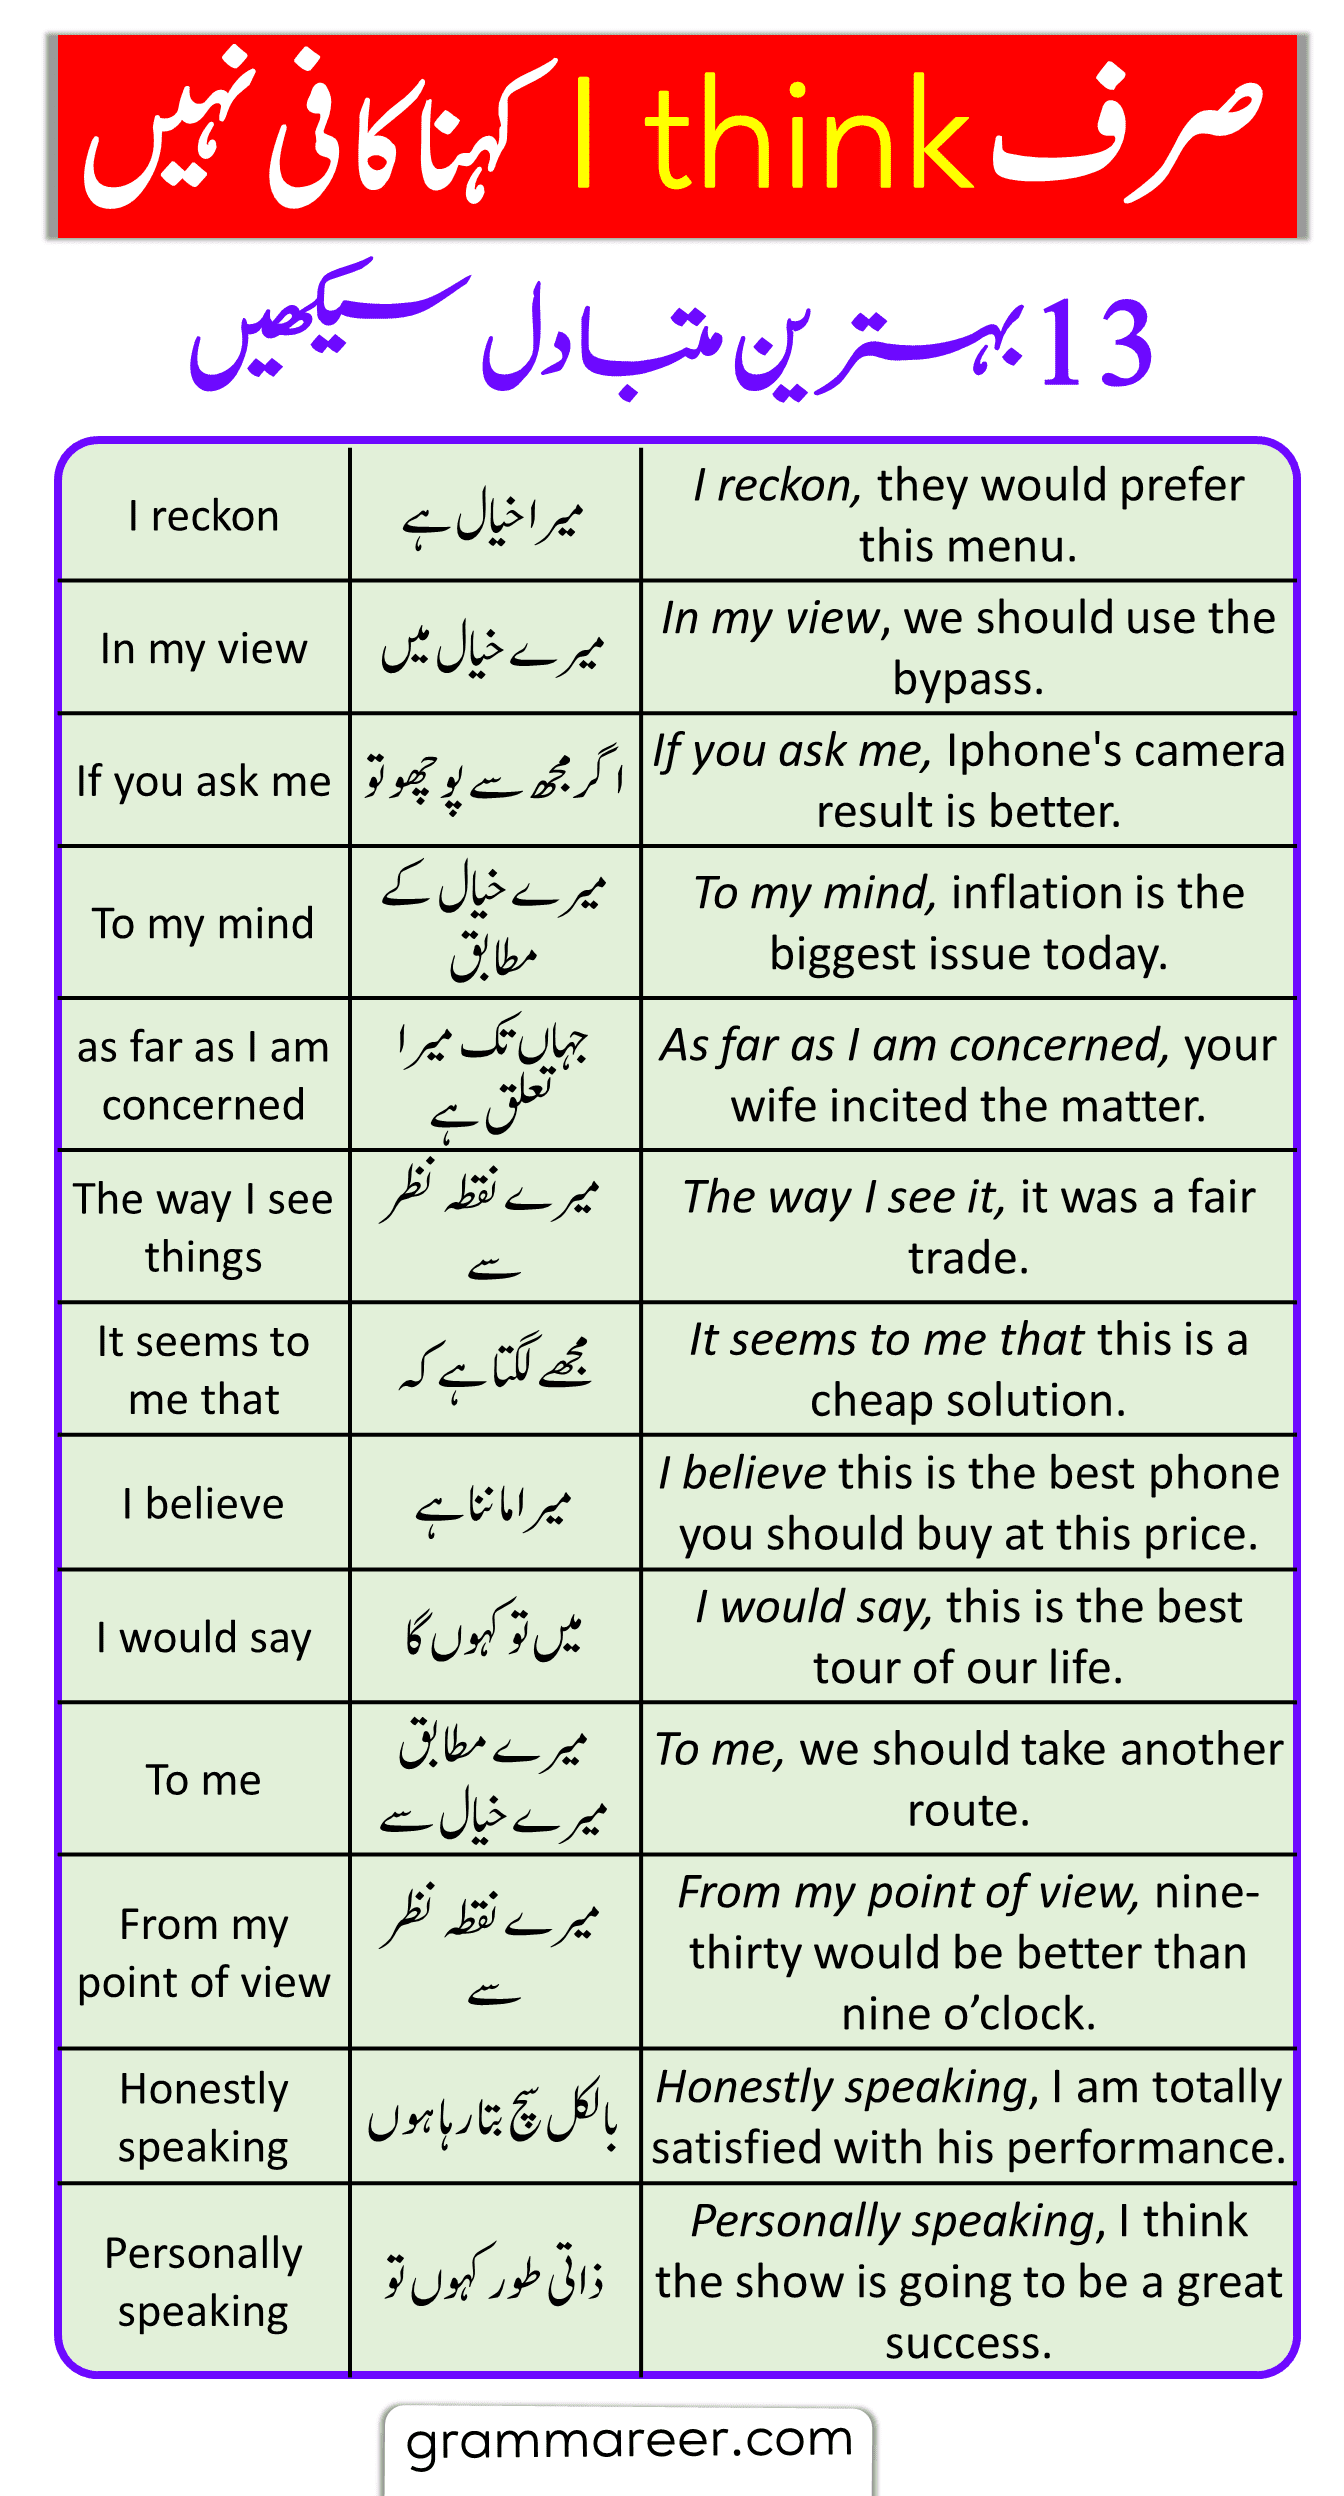 Other ways and Synonyms of I think with Urdu Translation